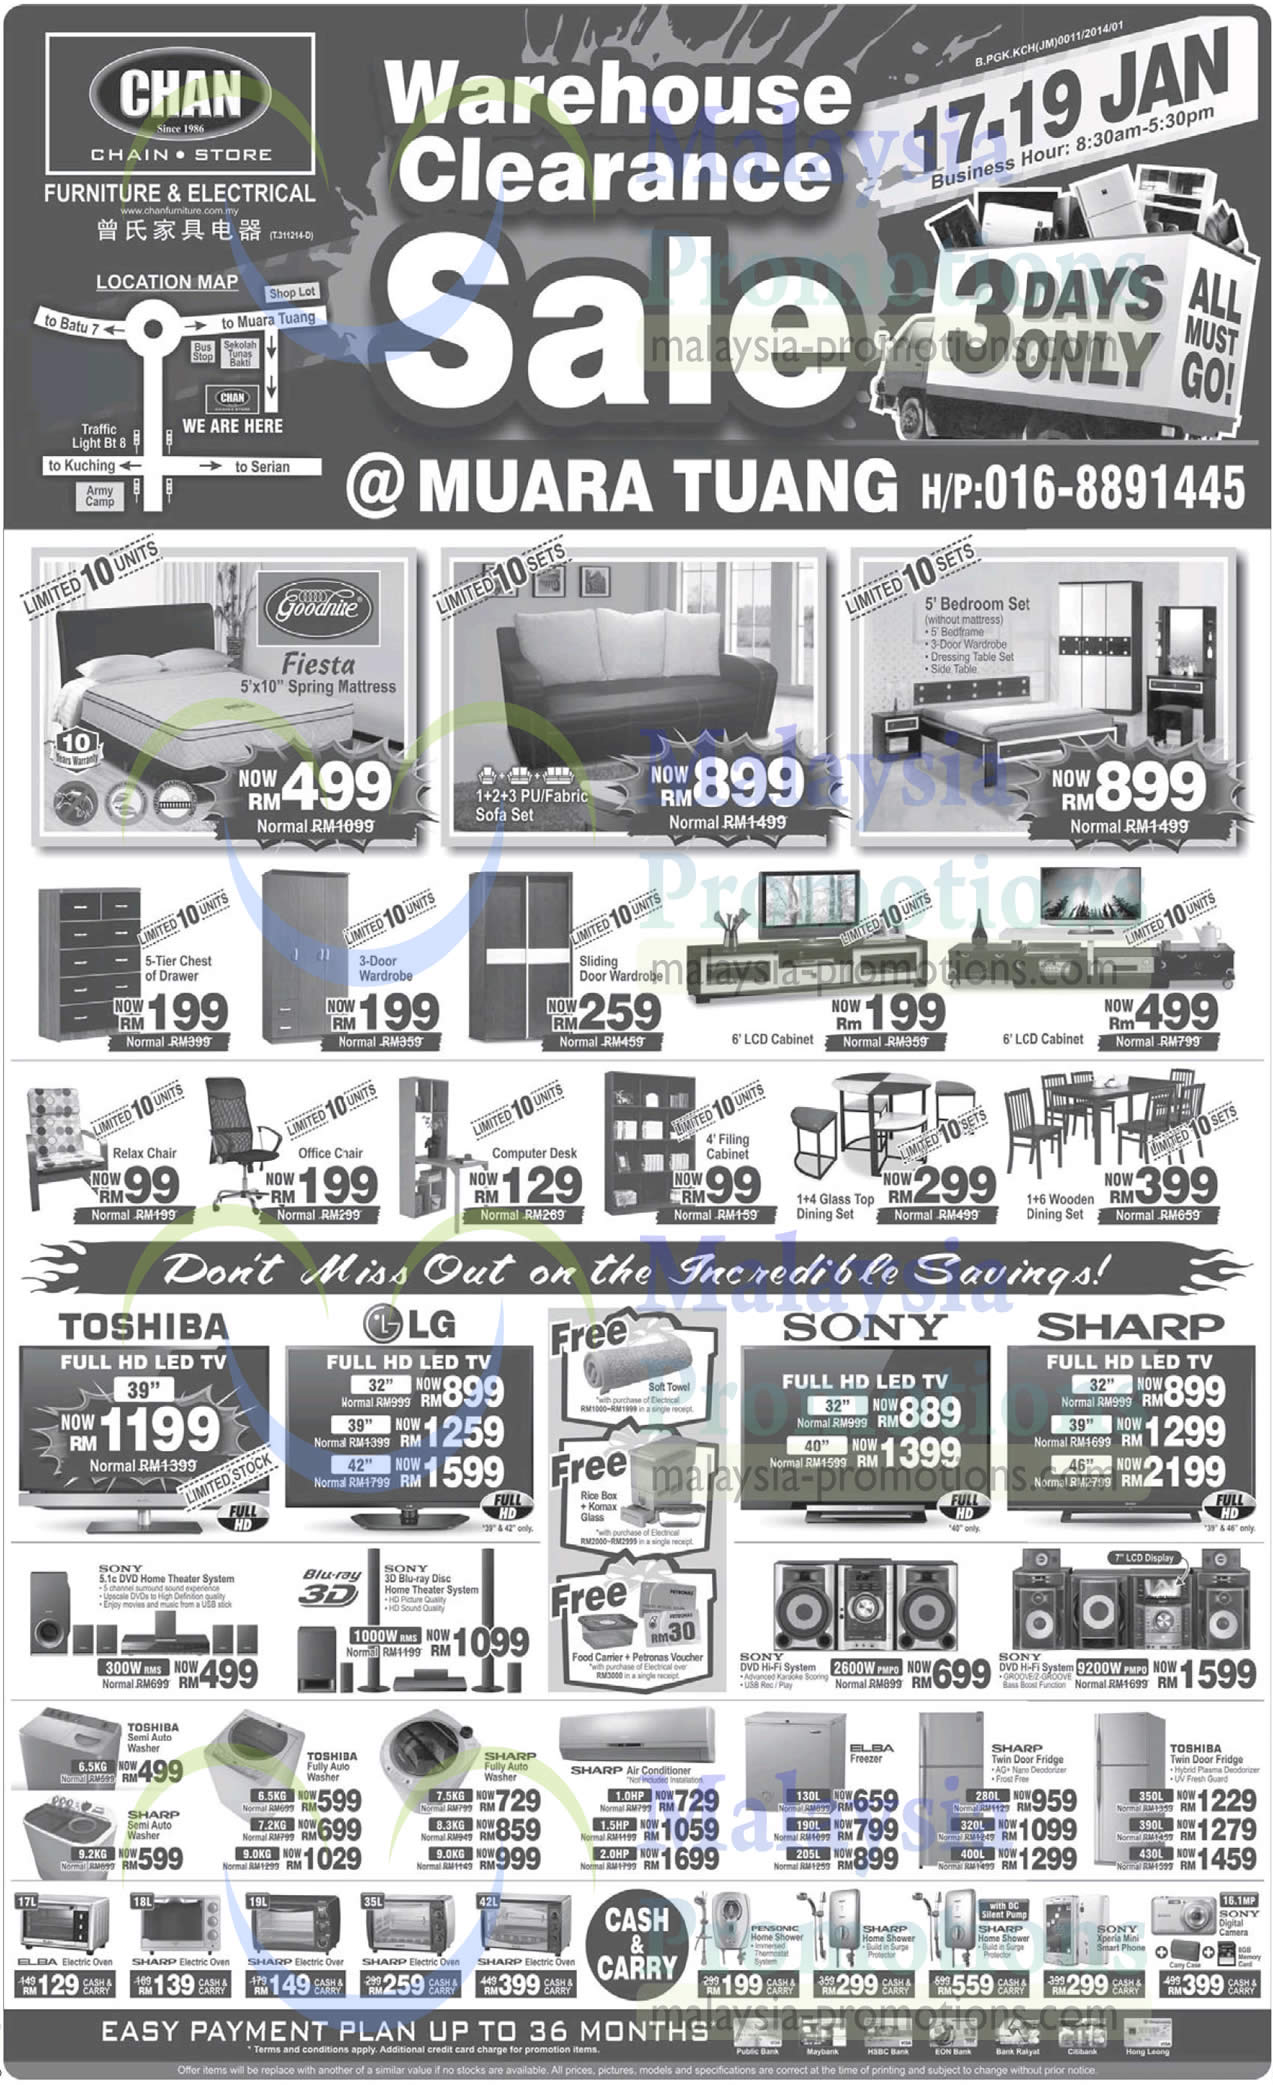 List Of Chan Furniture Electrical Chain Store Related Sales Deals Promotions News Jul 2021 Msiapromos Com